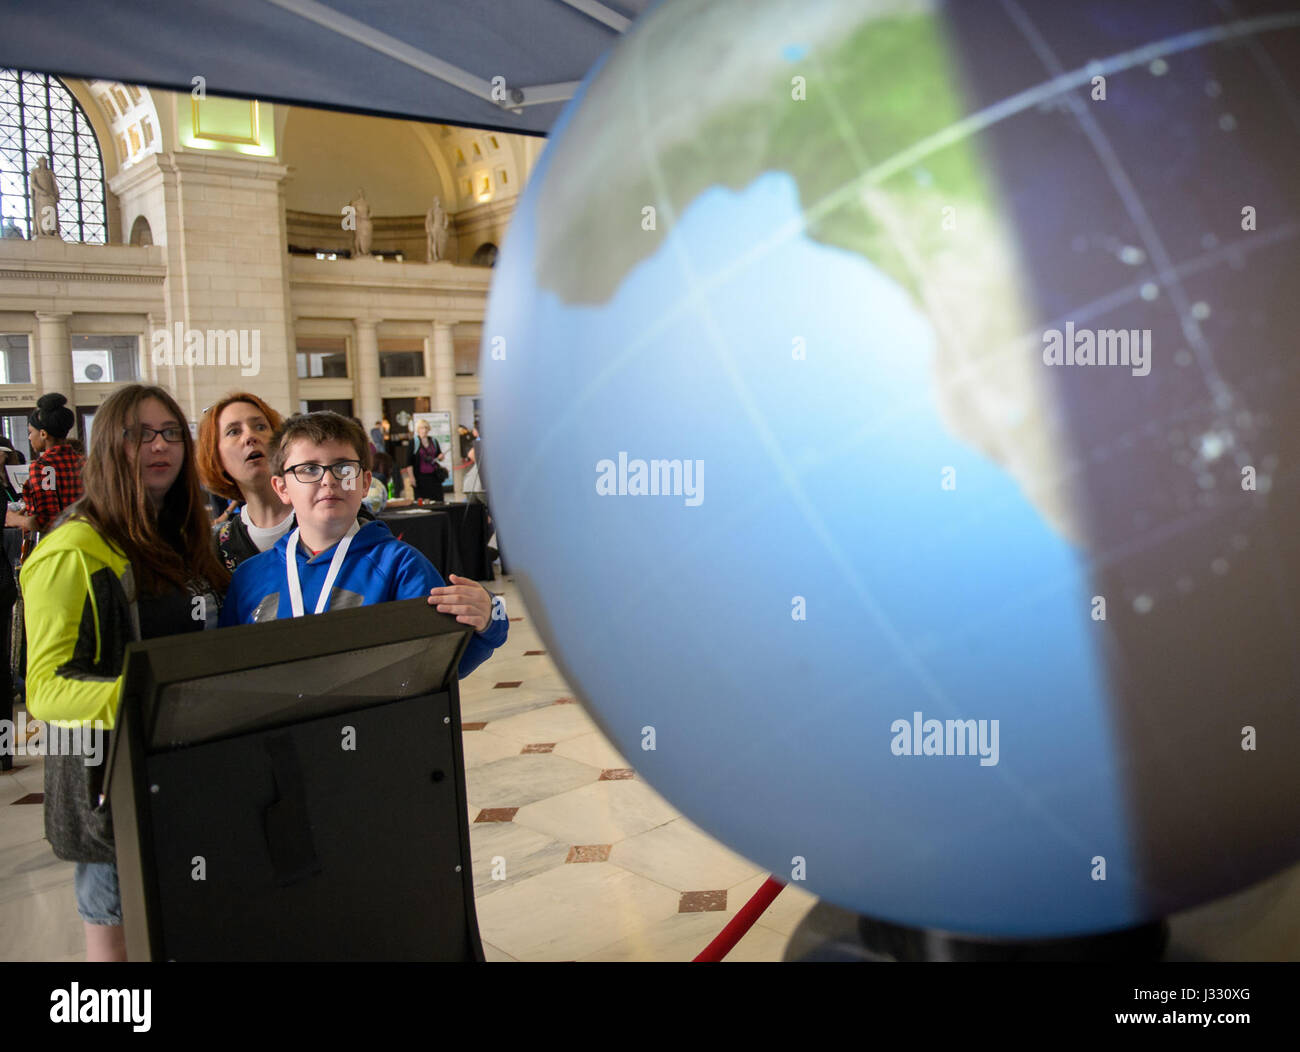 Visitors explore one of NASA's exhibits at the Earth Day event on Thursday, April 20, 2017 at Union Station in Washington, D.C. Stock Photo